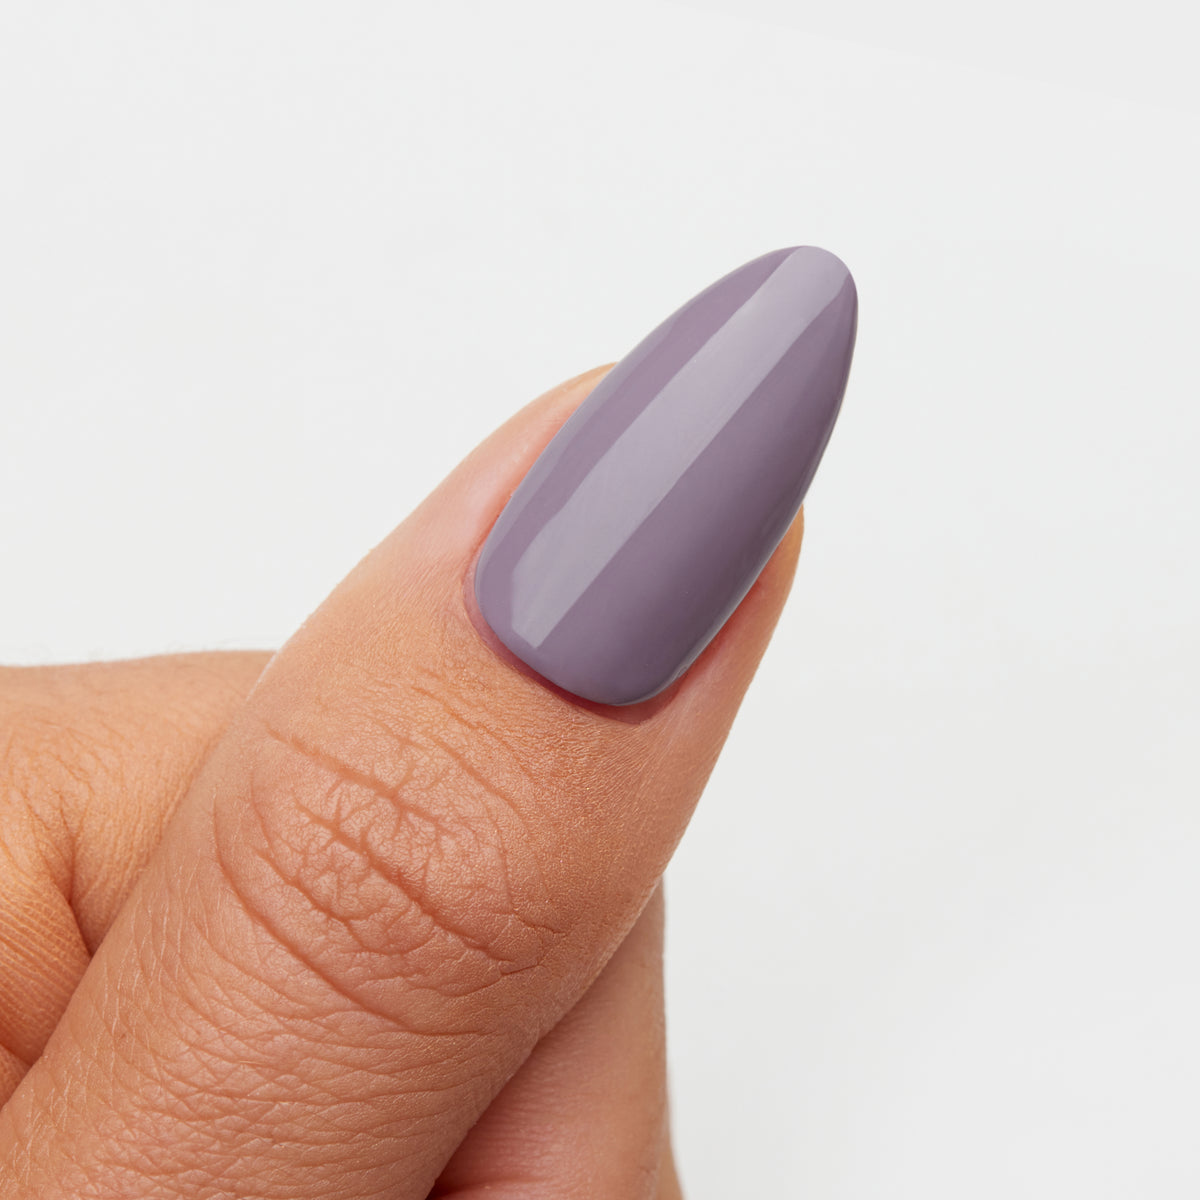 Gelous Moody in Mauve gel nail polish swatch - photographed in Australia